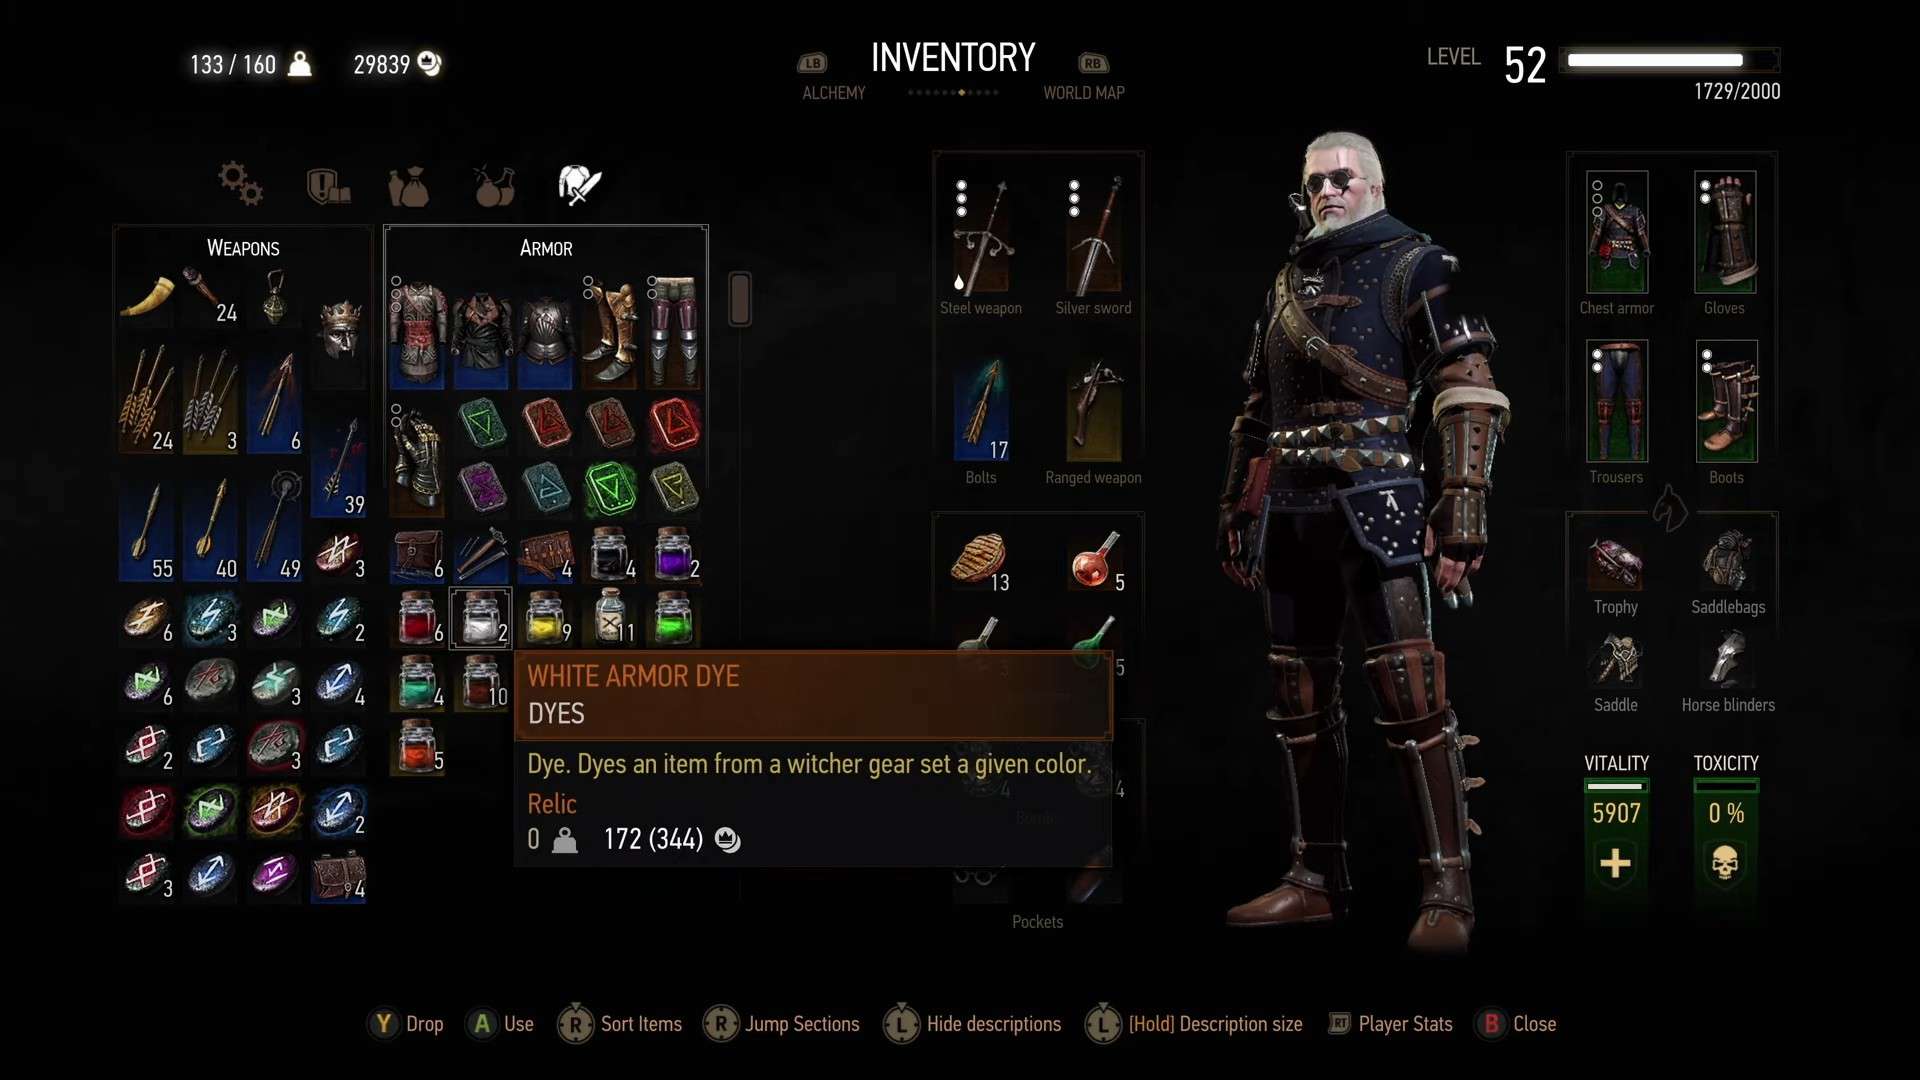 Dye Armor in The Witcher 3